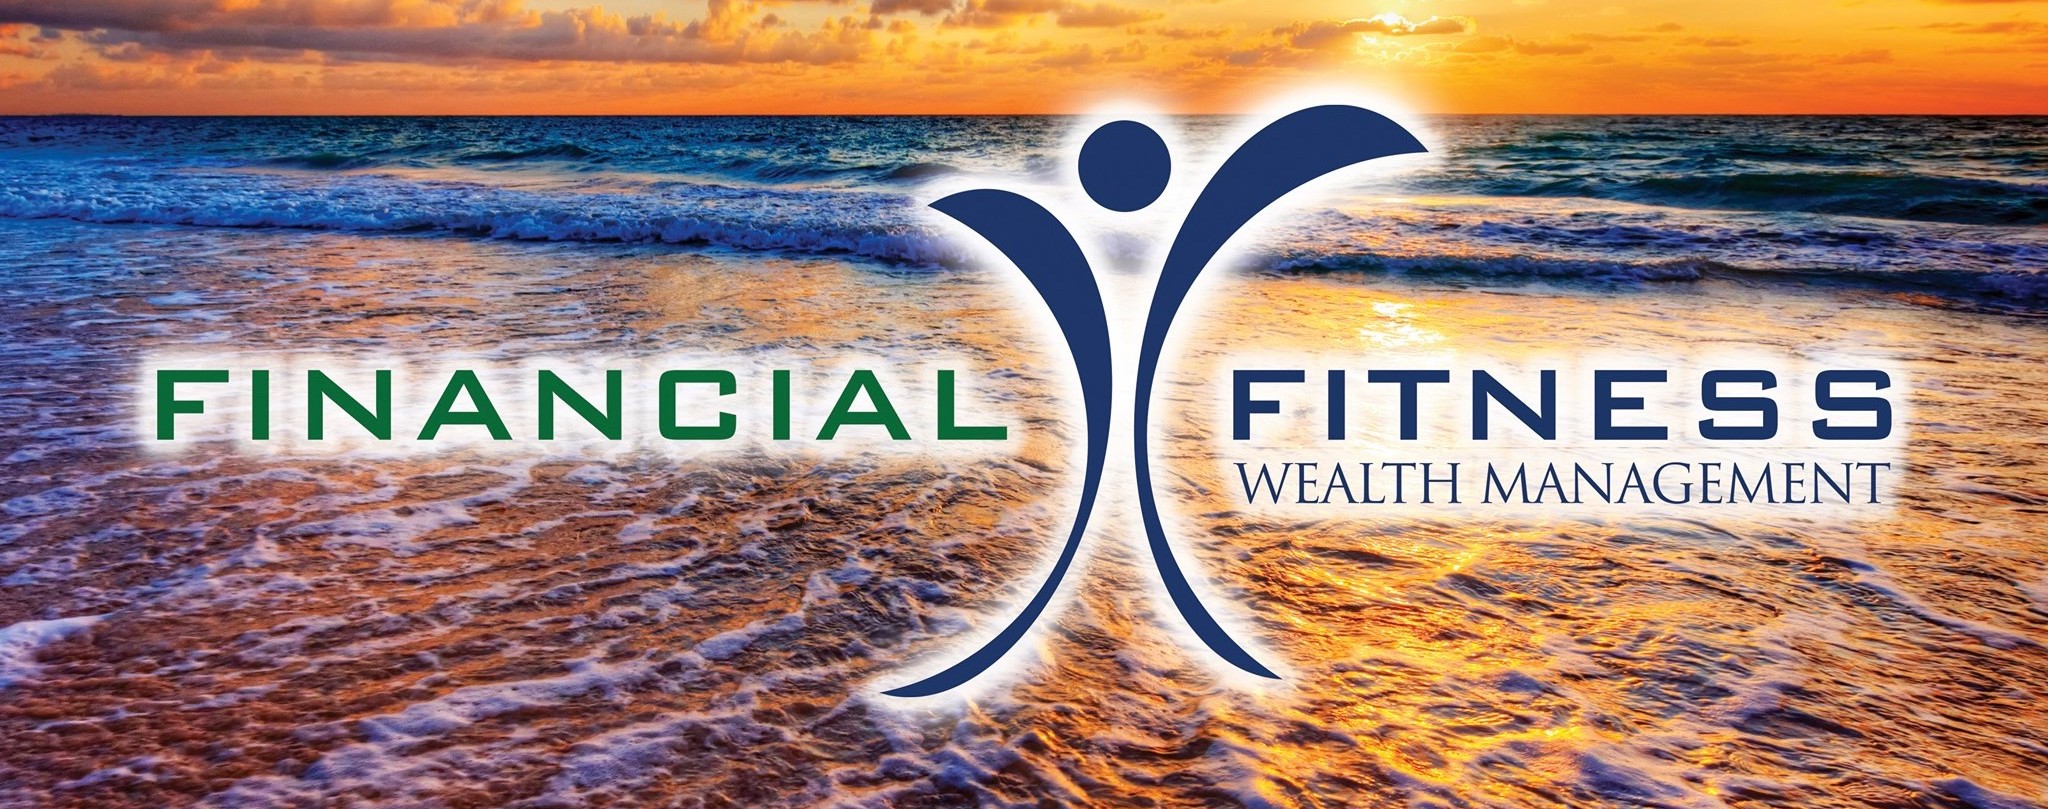 Financial Fitness Wealth Management